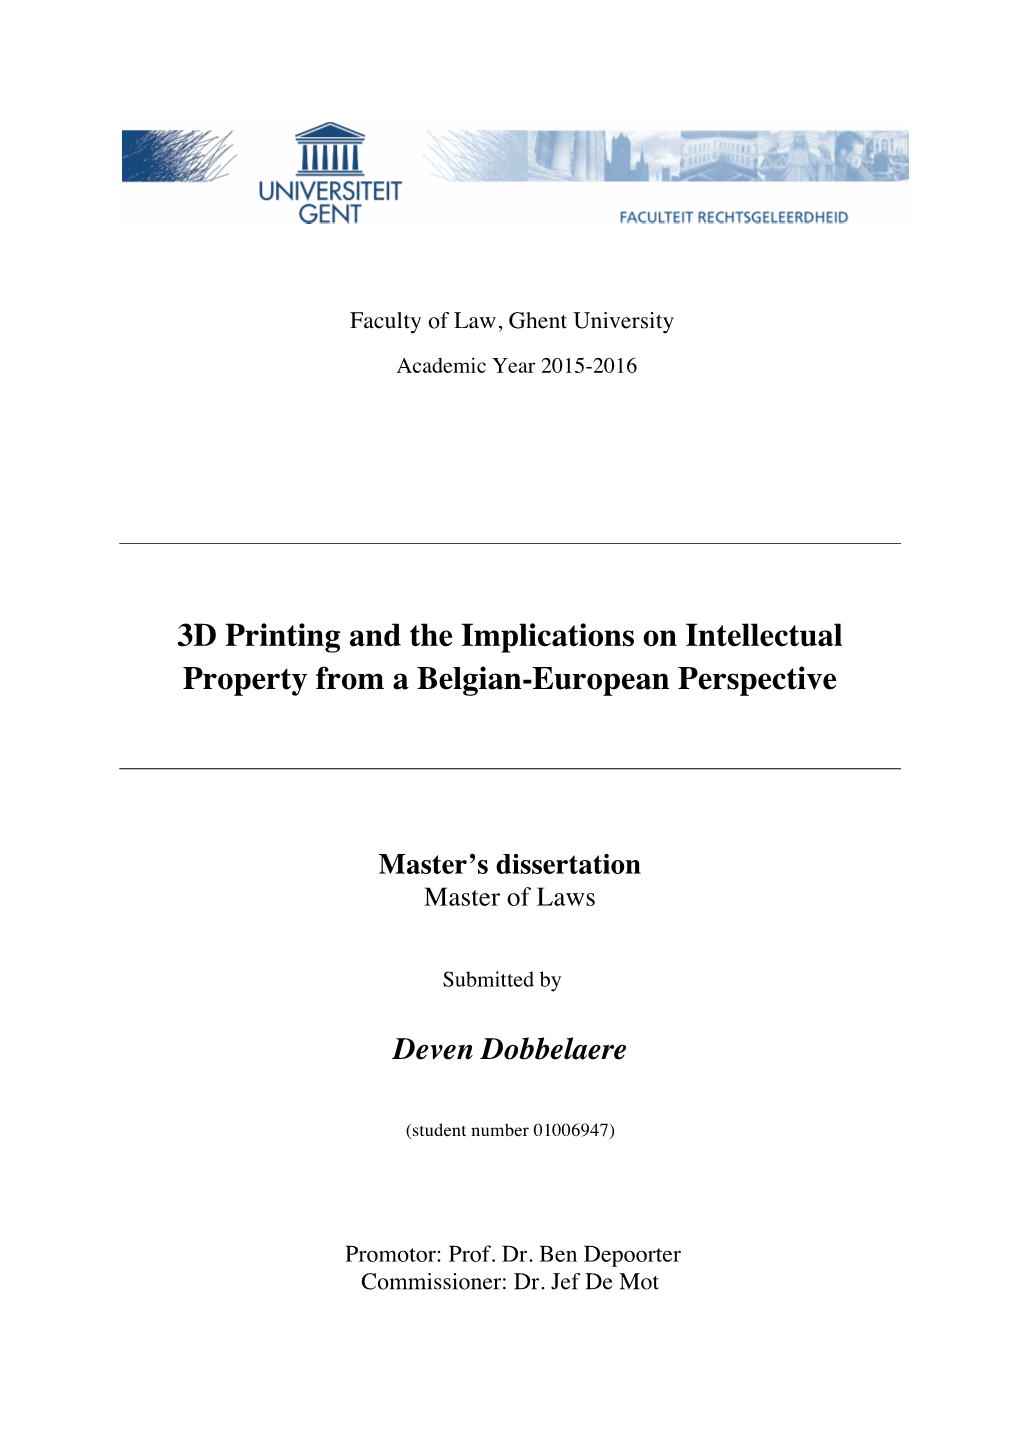 3D Printing and the Implications on Intellectual Property from a Belgian-European Perspective